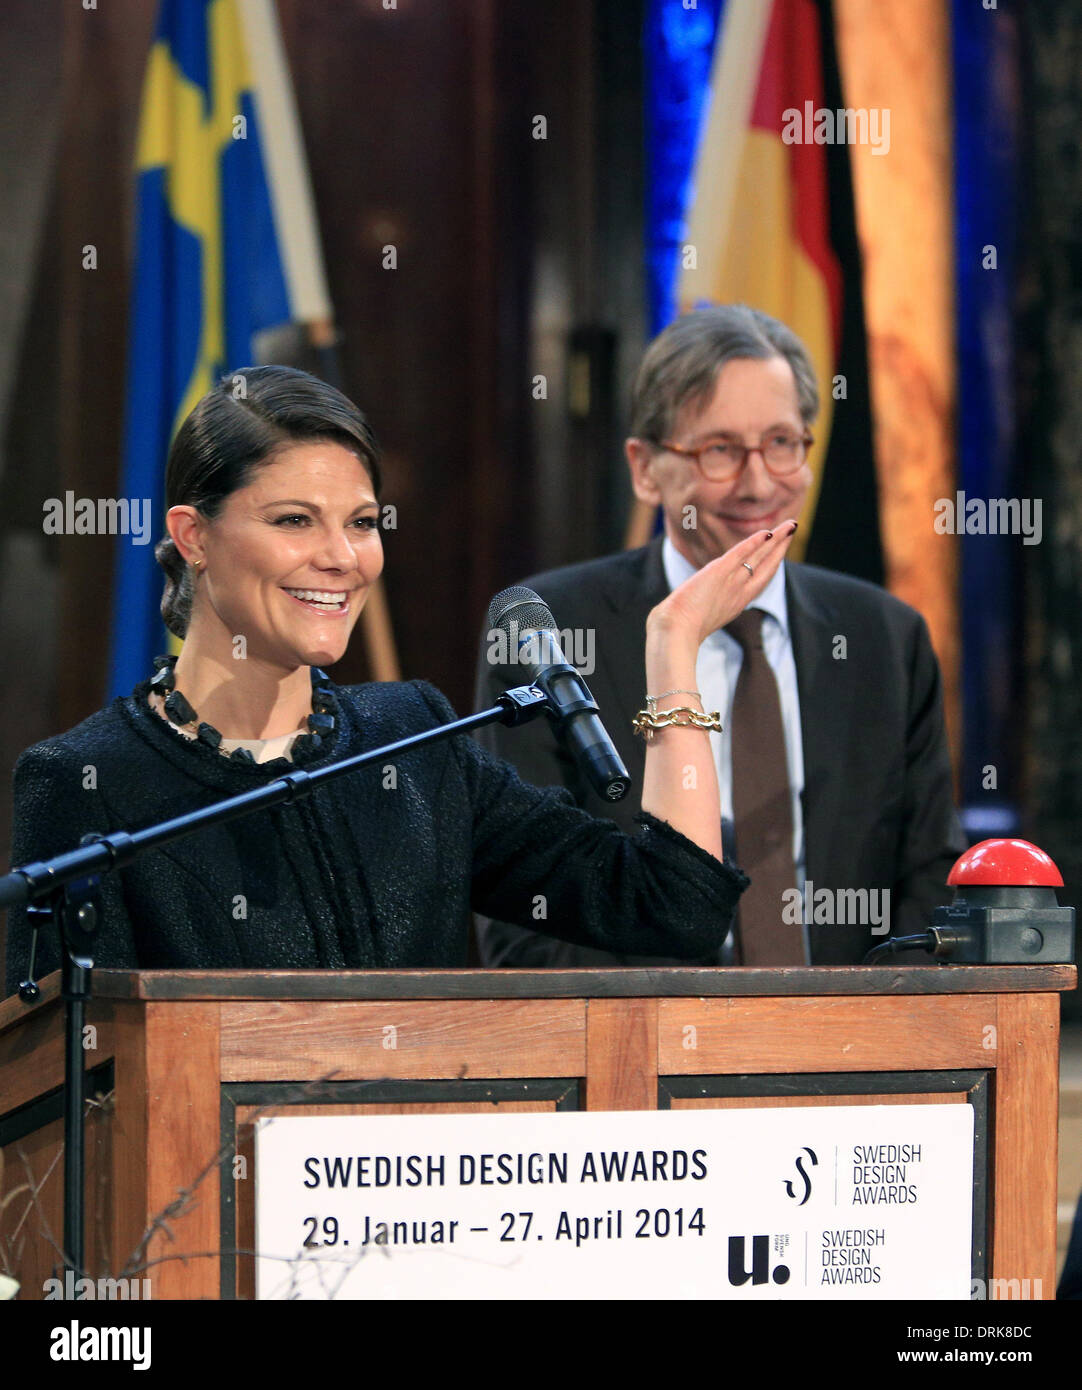 Hamburg, Germany. 28th Jan, 2014. Swedish crown princess Victoria stands next to Sweden's ambassador Staffan Carlsson as she speaks at the Museum of Ethnology in Hamburg, Germany, 28 January 2014. The 36 year old Swedish crown princess and her 40 year old husband are on a two-day trip to Hamburg, Duesseldorf and Essen with an economic delegation. Photo: CHRISTIAN CHARISIUS/DPA/Alamy Live News Stock Photo